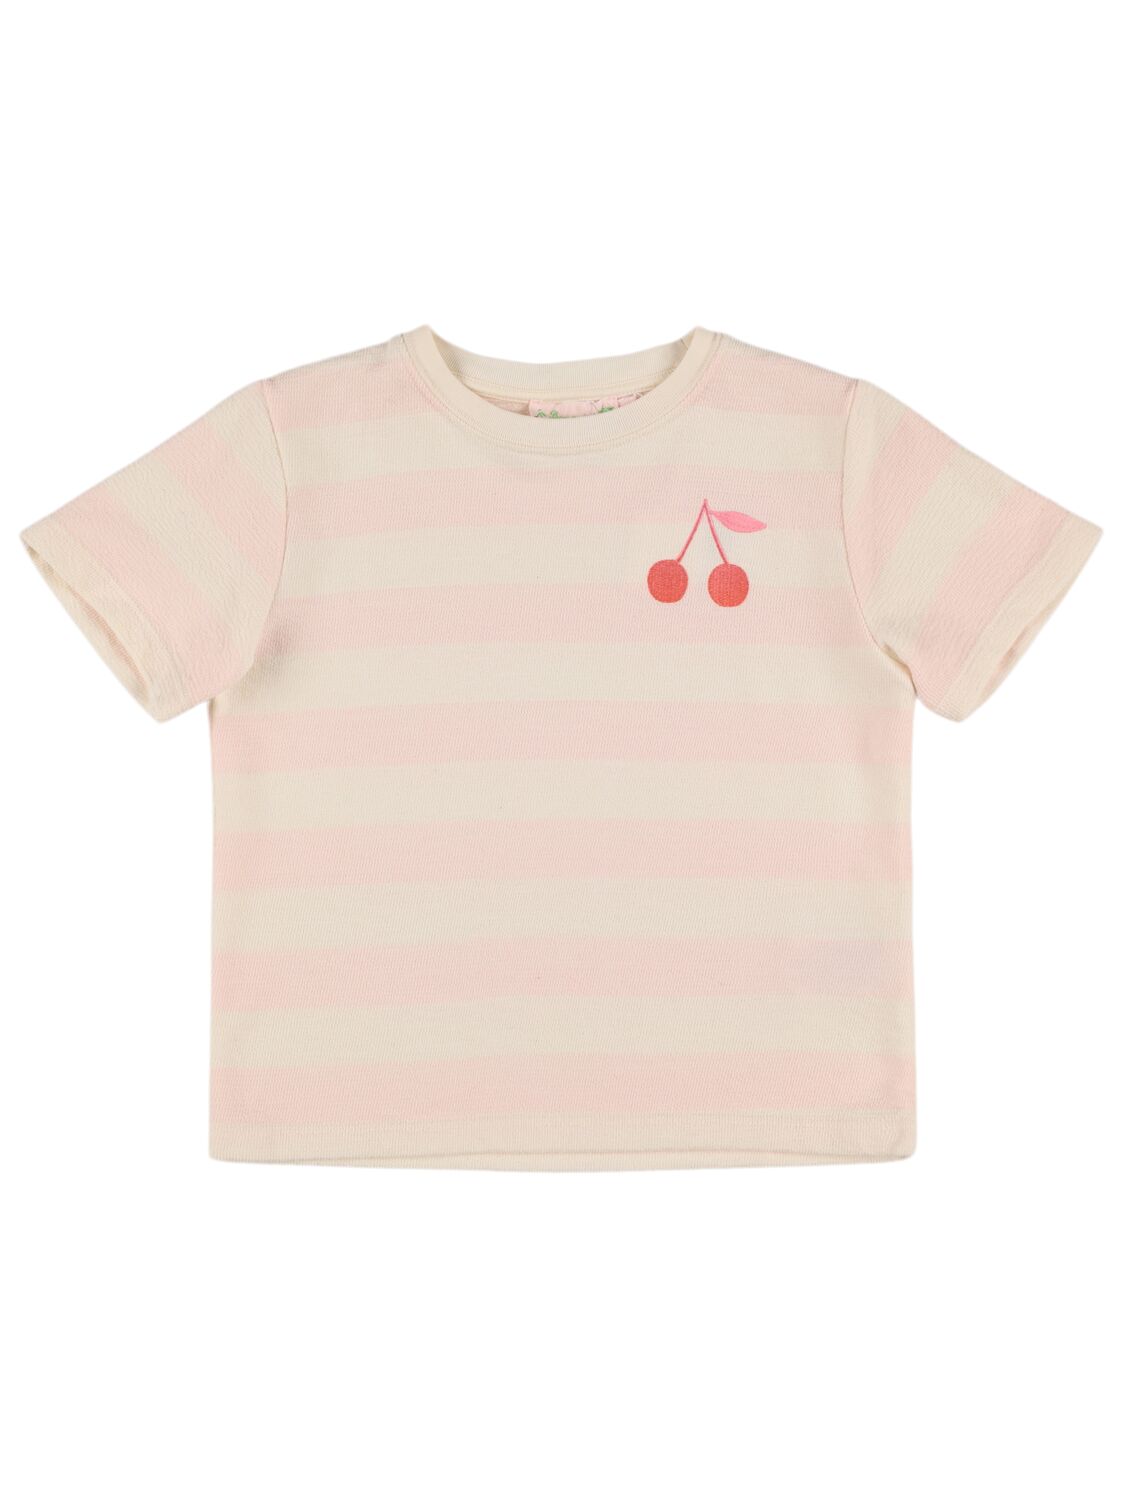 Bonpoint Kids' Embroidered Cotton Jersey T-shirt In Pink